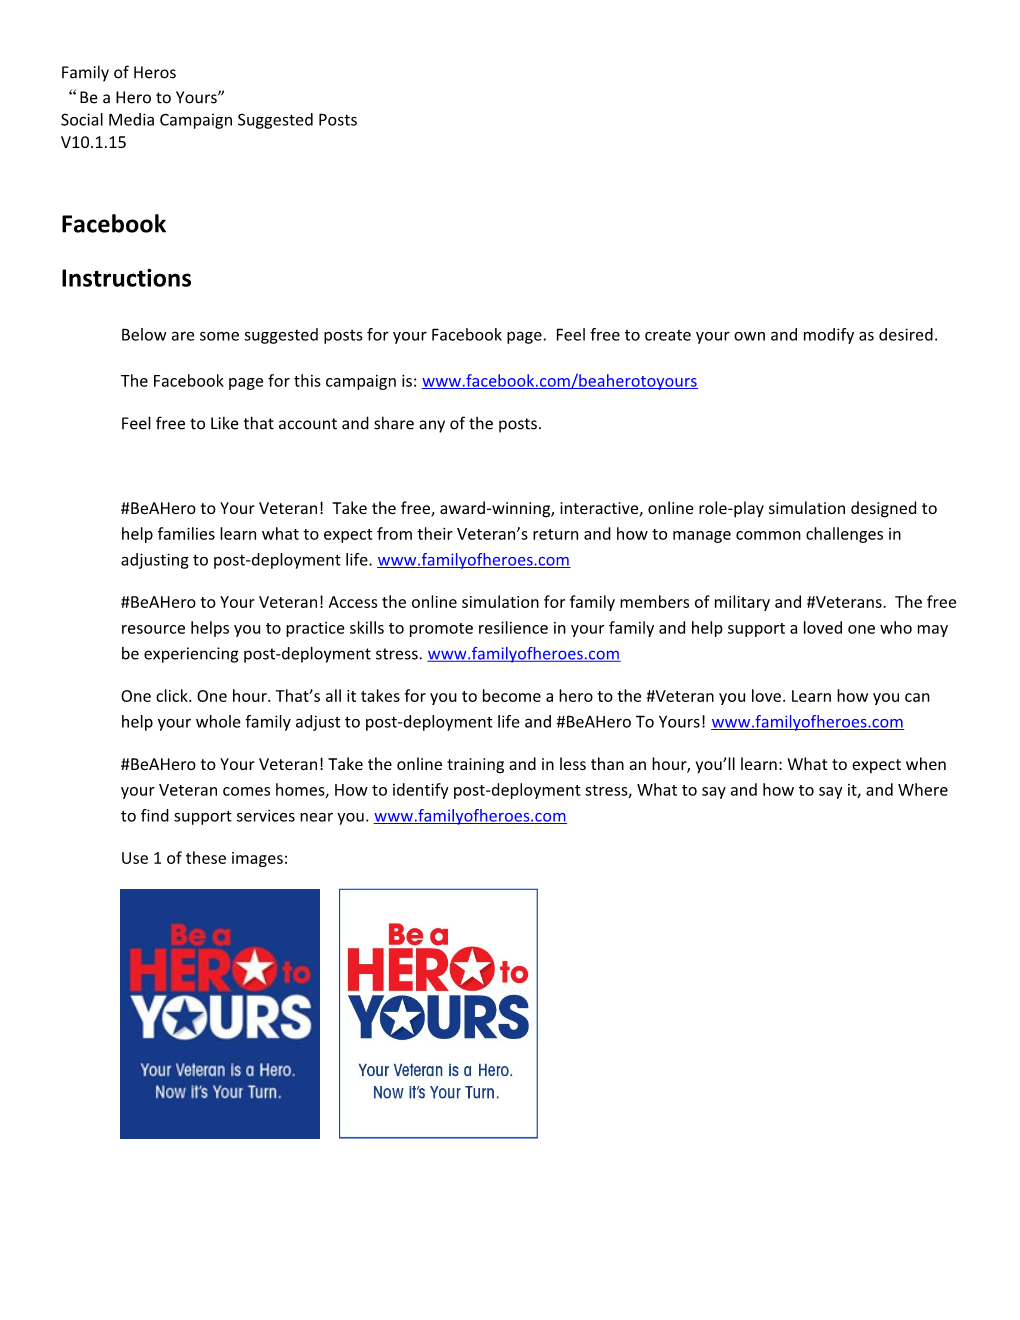 Social Media Campaign Suggested Posts